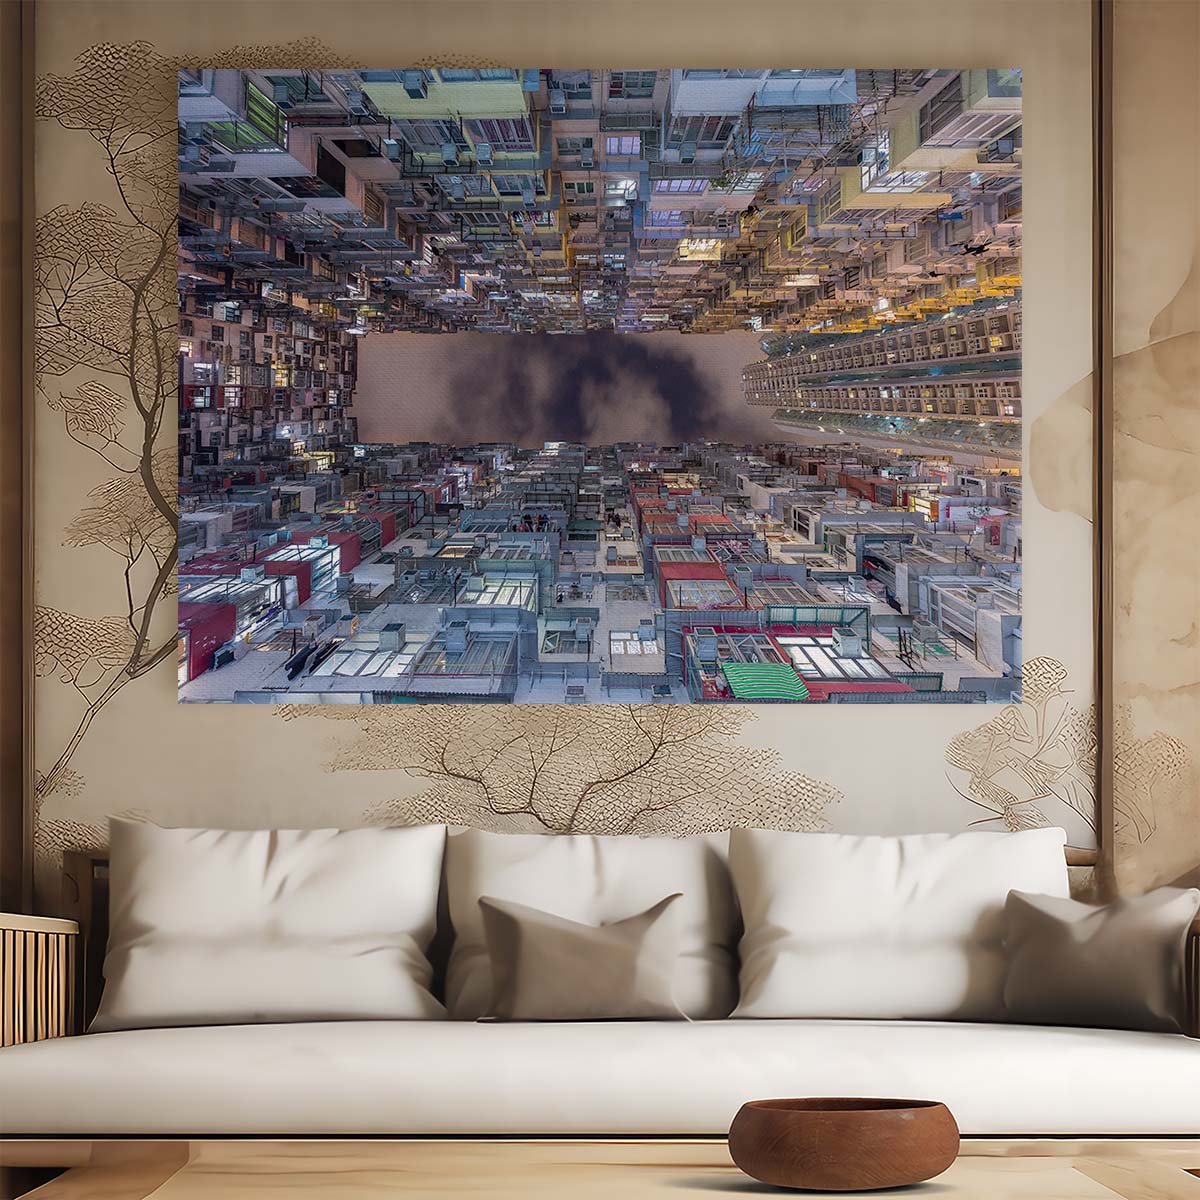 Hong Kong Iconic Night Cityscape Architecture Wall Art by Luxuriance Designs. Made in USA.